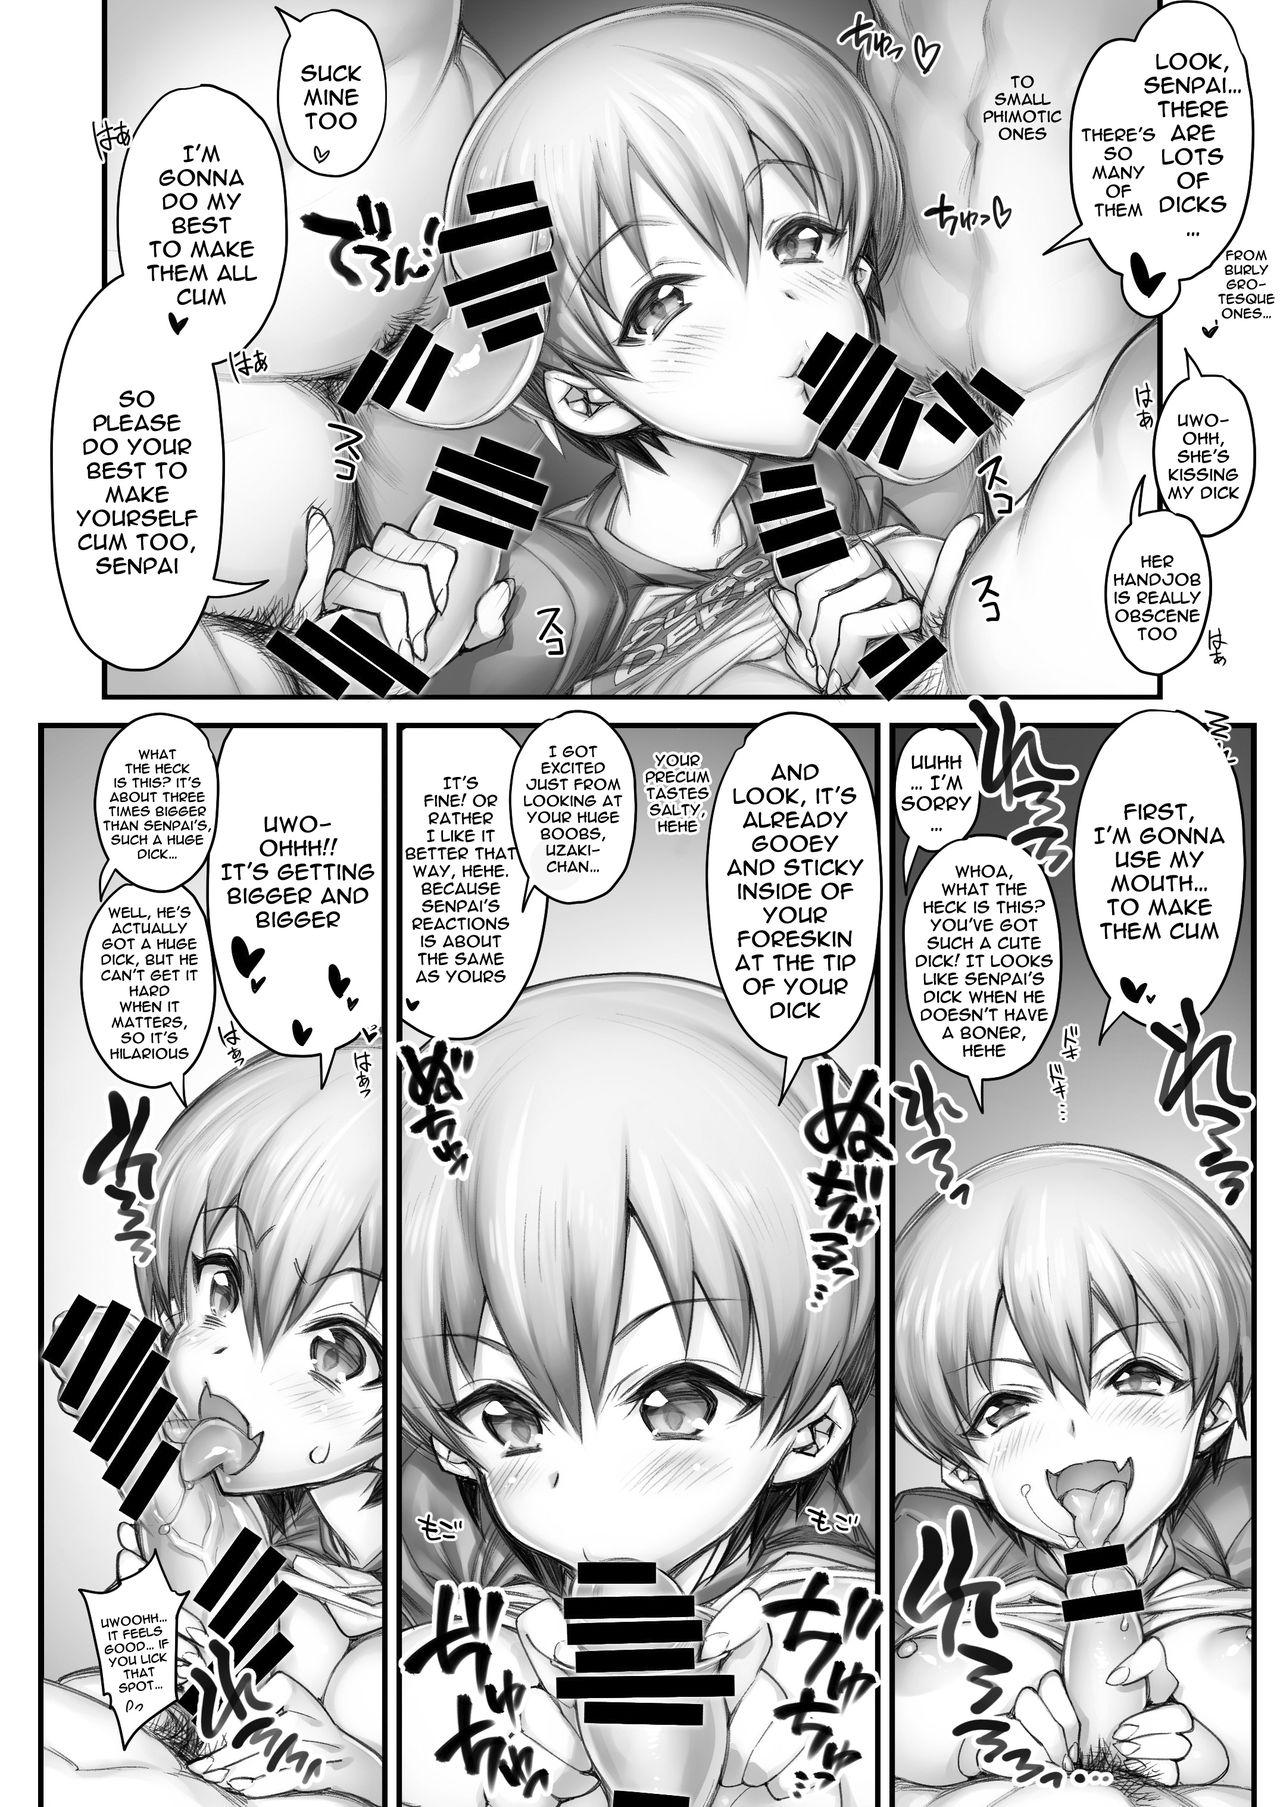 Oral Sex Uzaki-chan Wants To Message To Senpai Videos Of Her Having Sex With Lots of Men!! - Uzaki chan wa asobitai Homosexual - Page 4